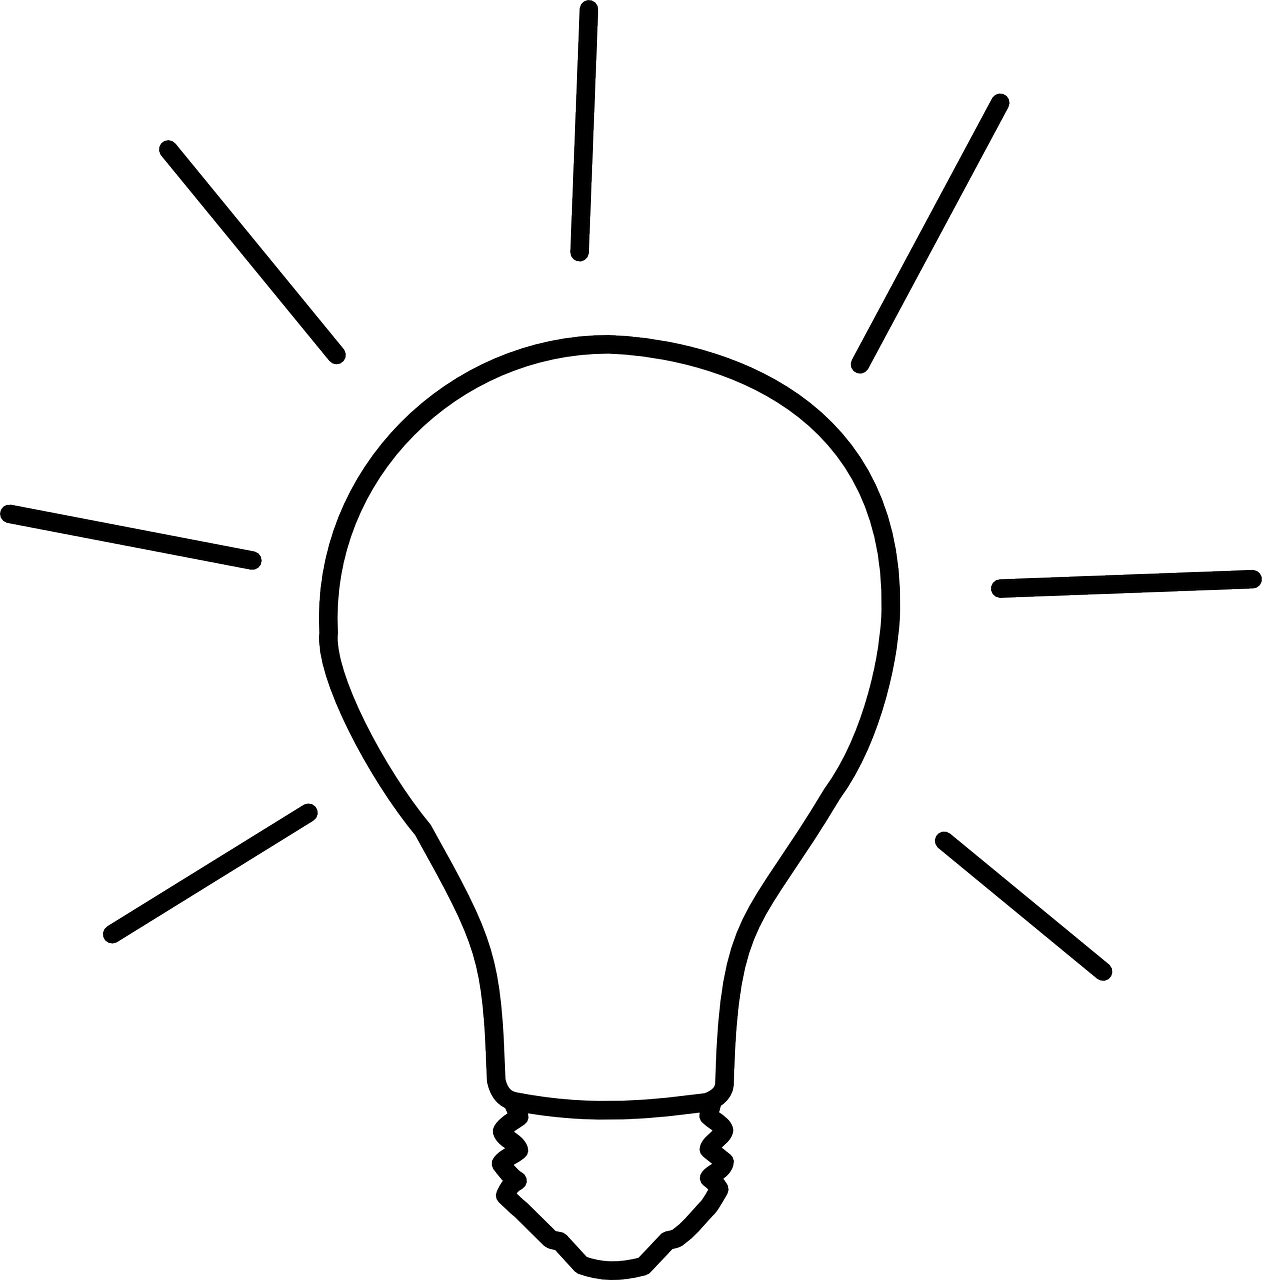 a light bulb with rays coming out of it, a picture, outline, black white, iq 4, simple lineart